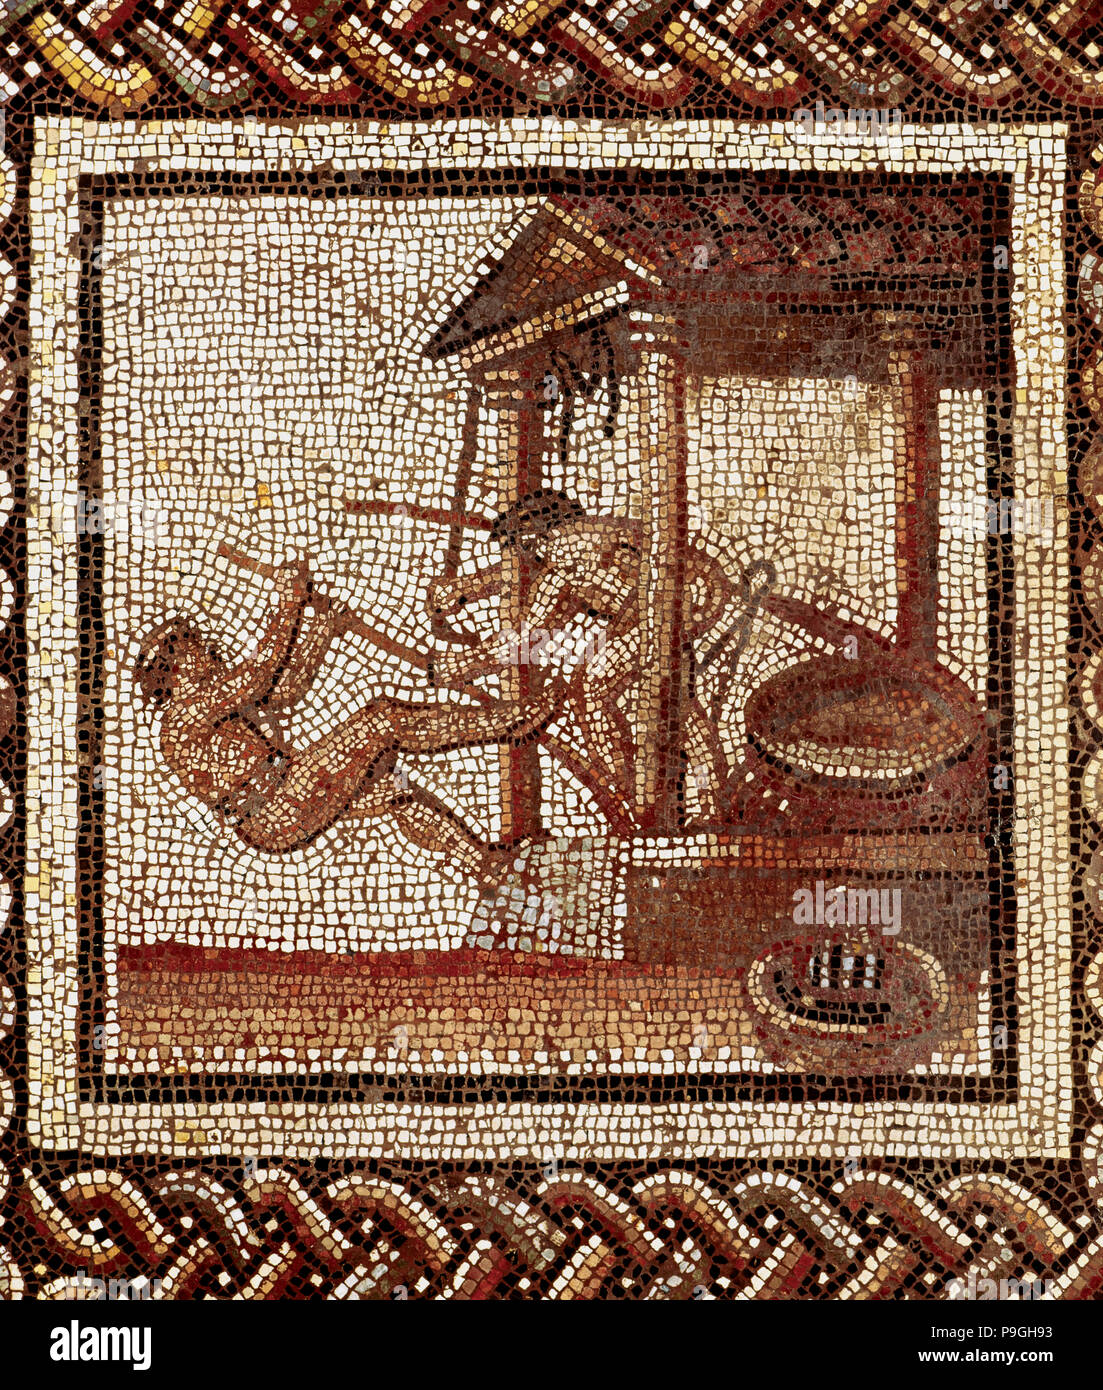 'Pressing olives for oil extraction', Roman mosaic. Stock Photo